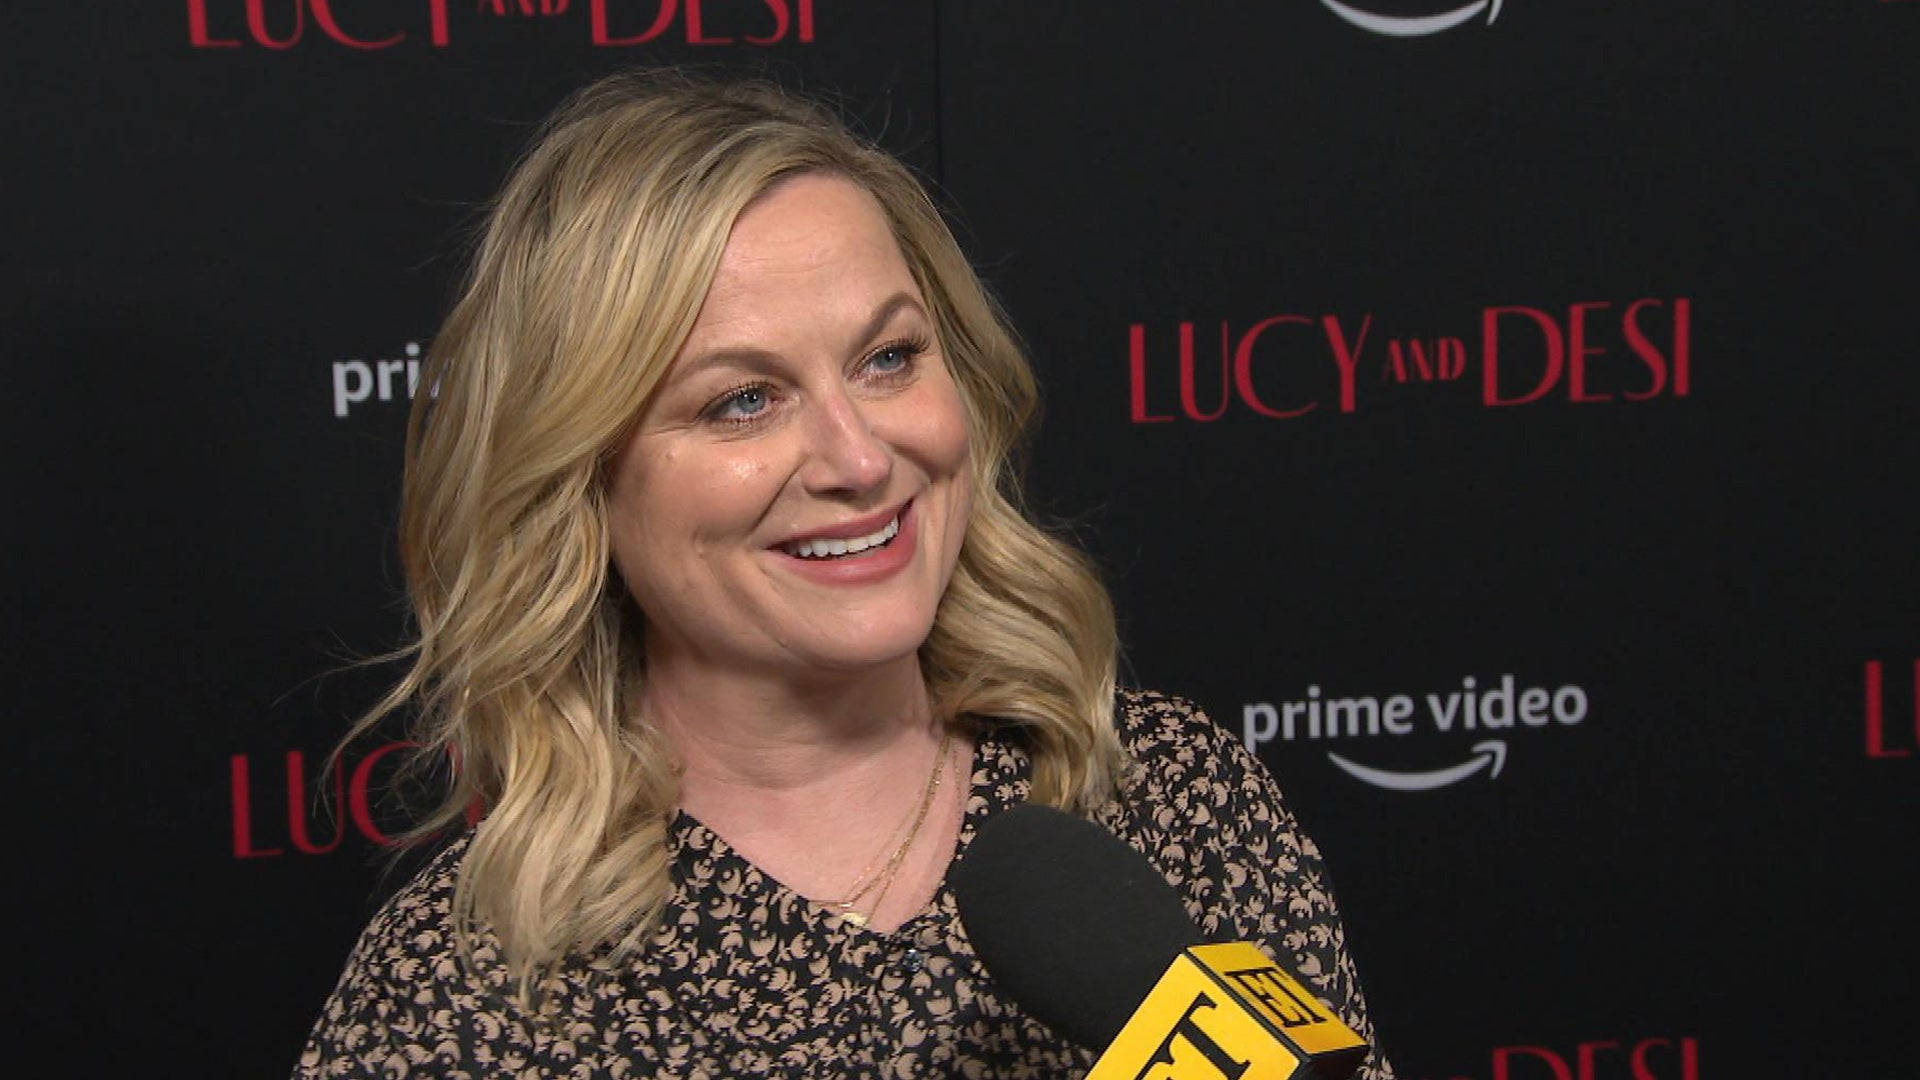 Amy Poehler Lucy And Desi Premiere Background